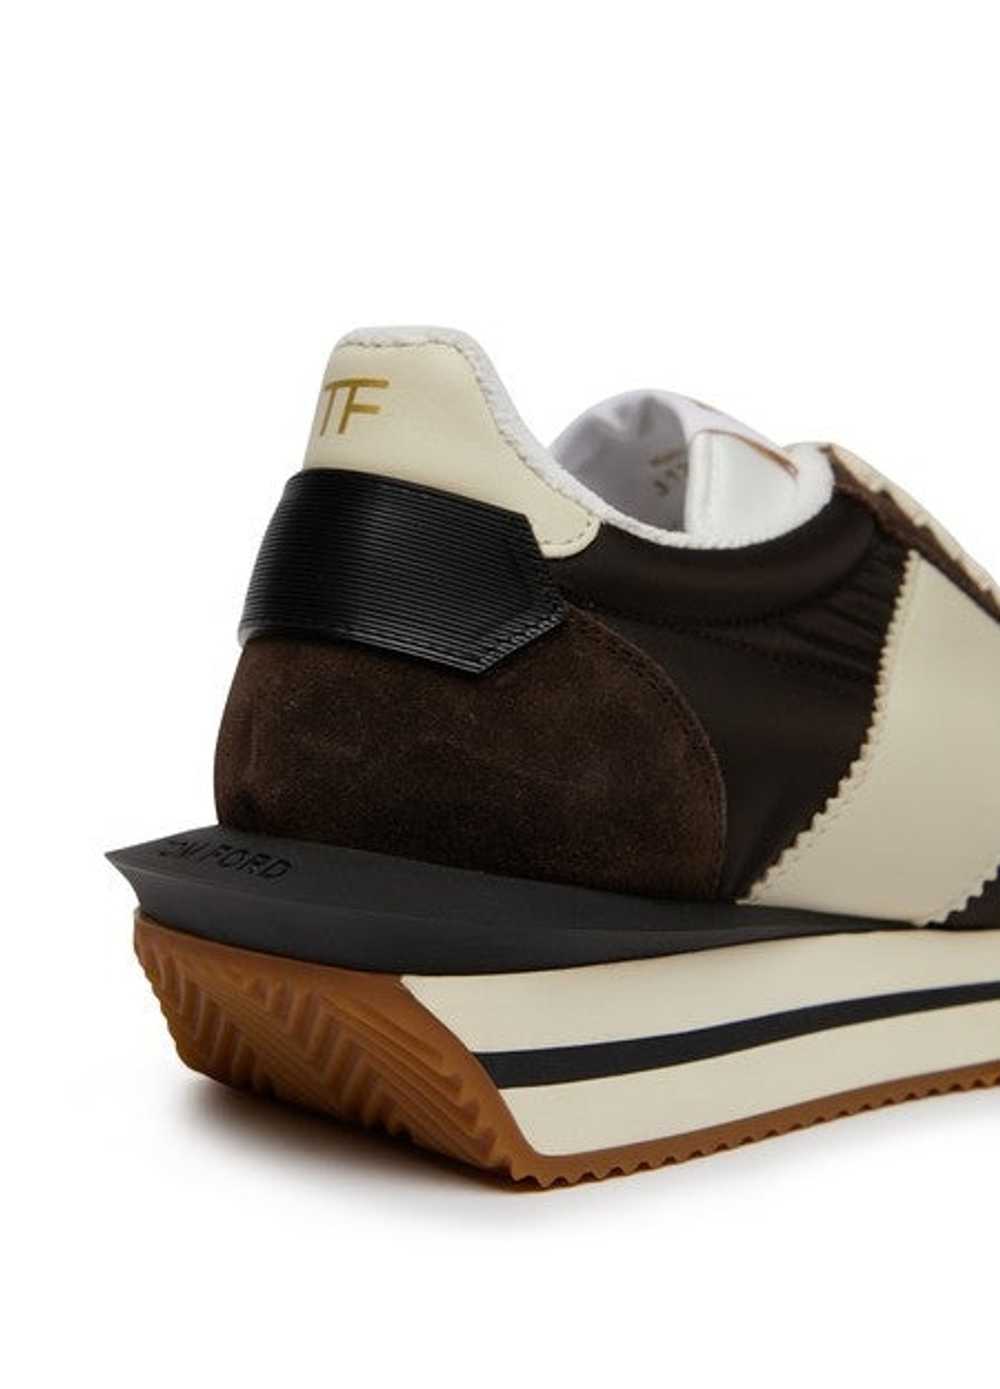 Tom Ford Men Suede & Tech Low Top Sneakers - image 6